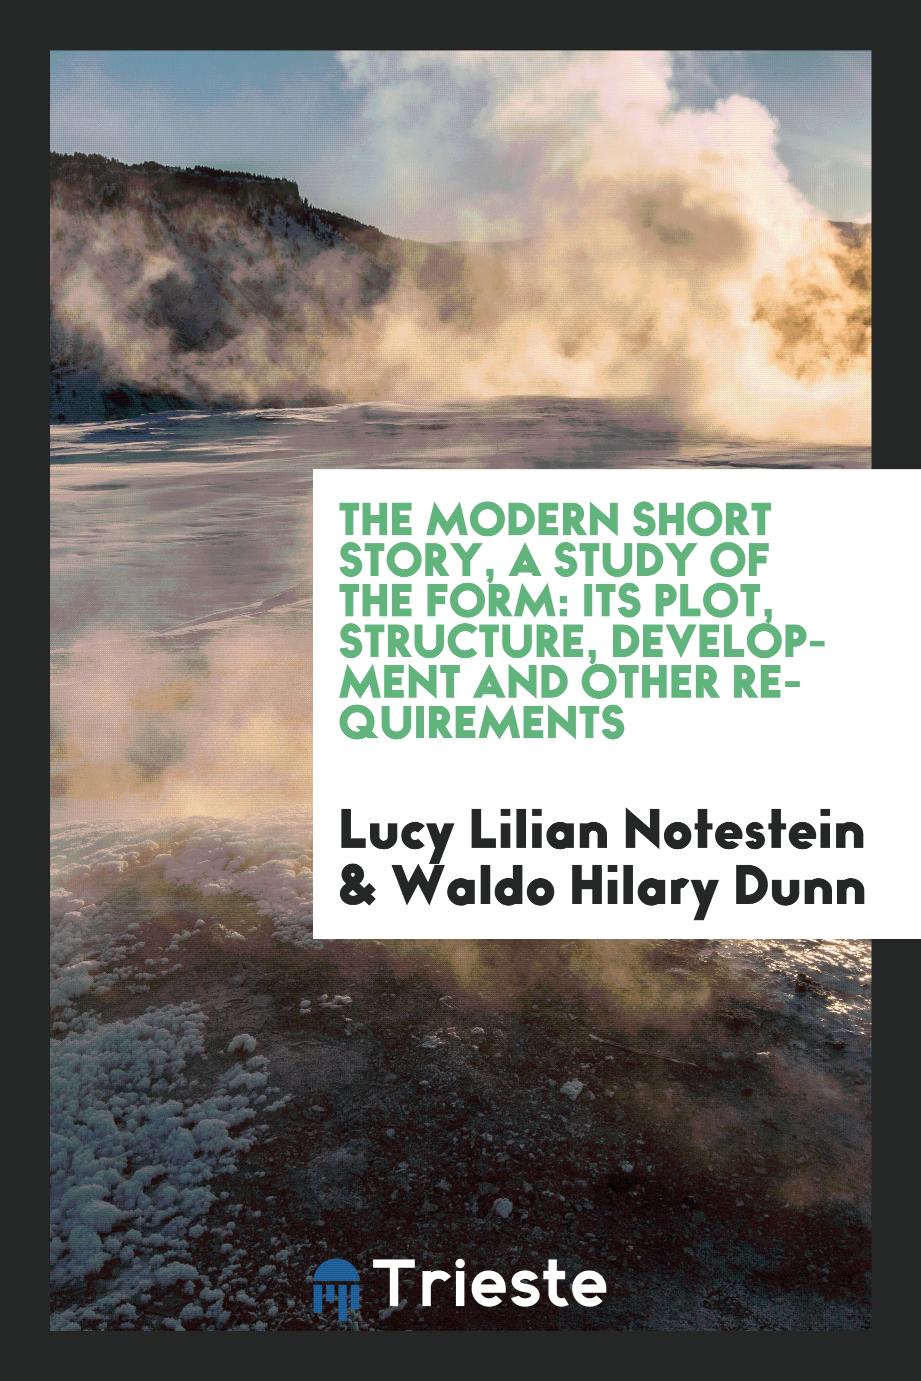 The modern short story, a study of the form: its plot, structure, development and other requirements